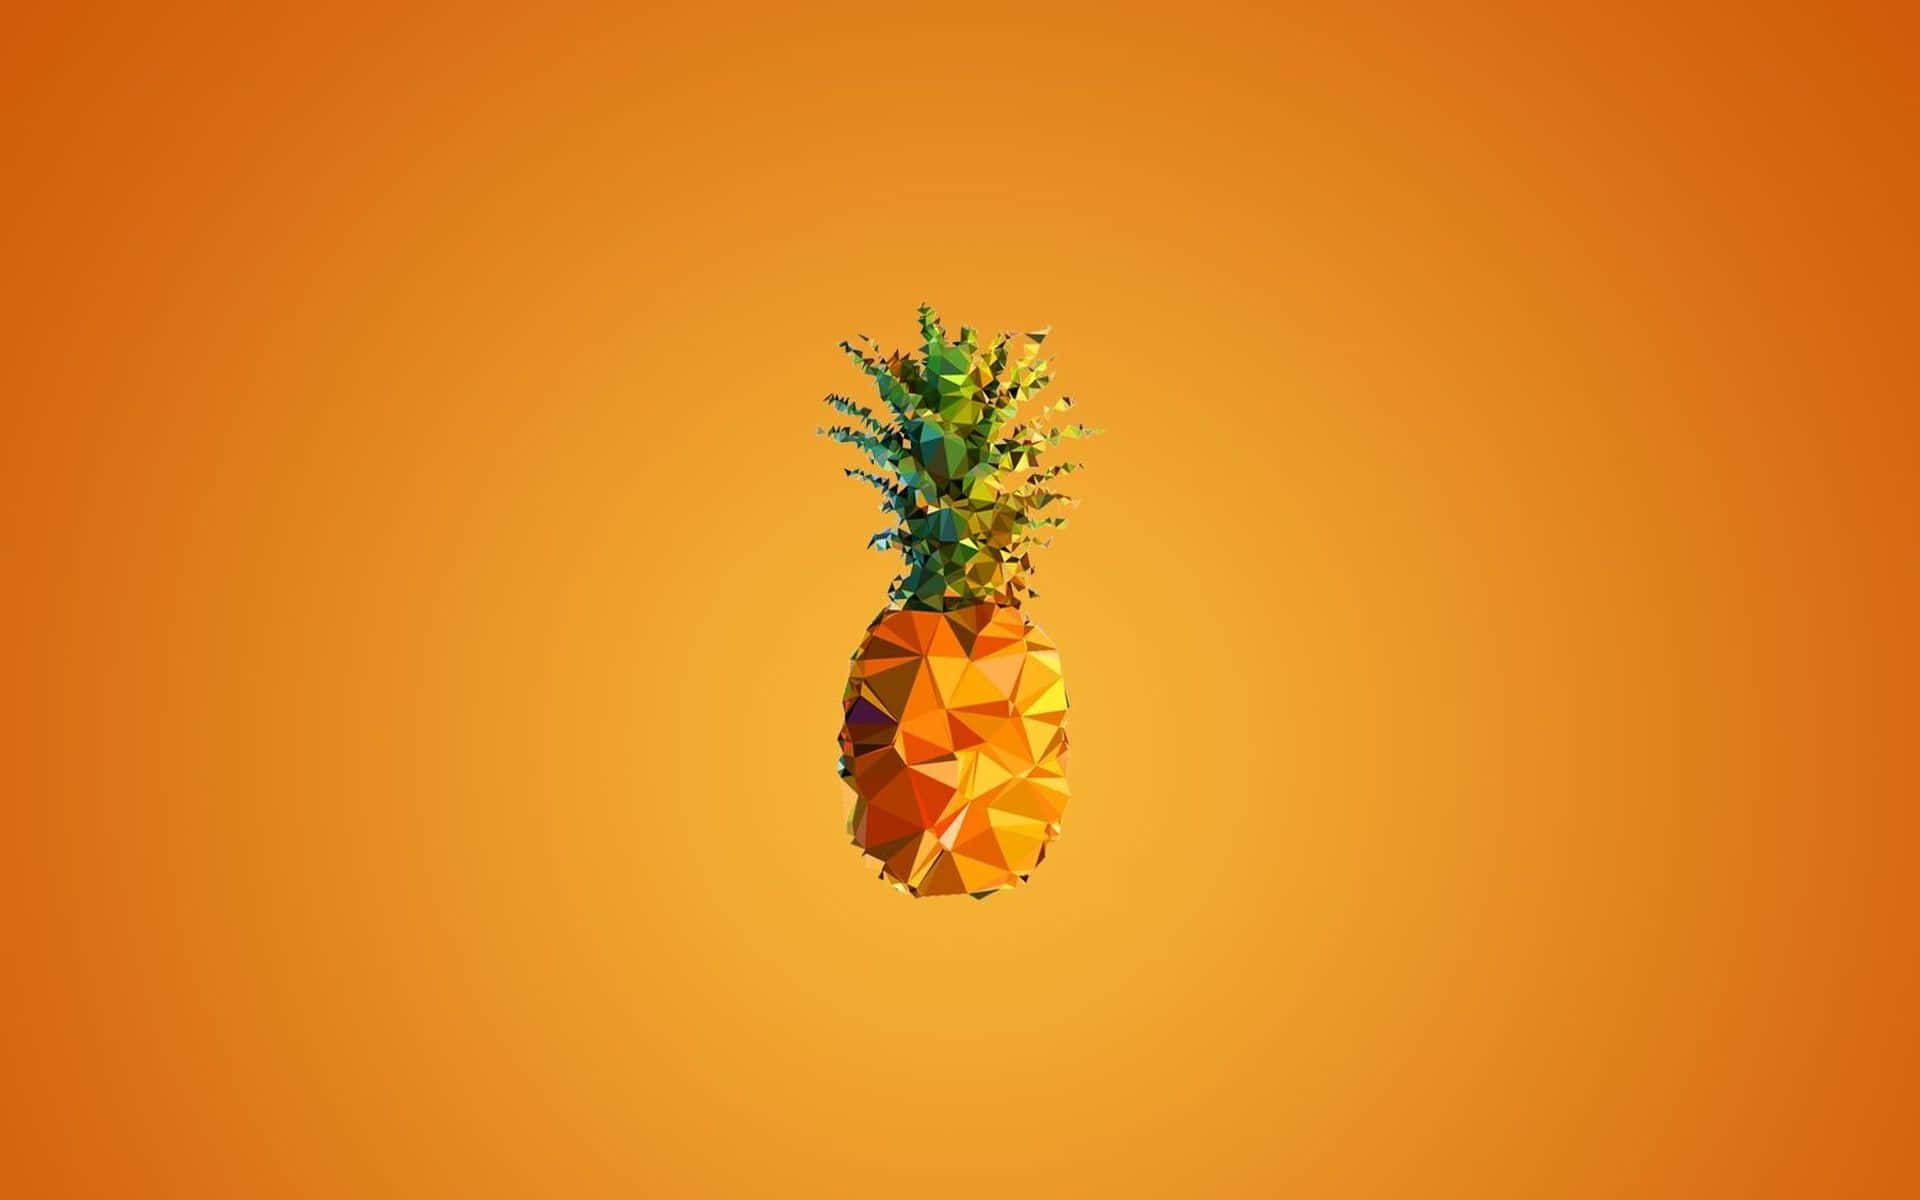 Refreshing Desktop with a Pineapple Wallpaper